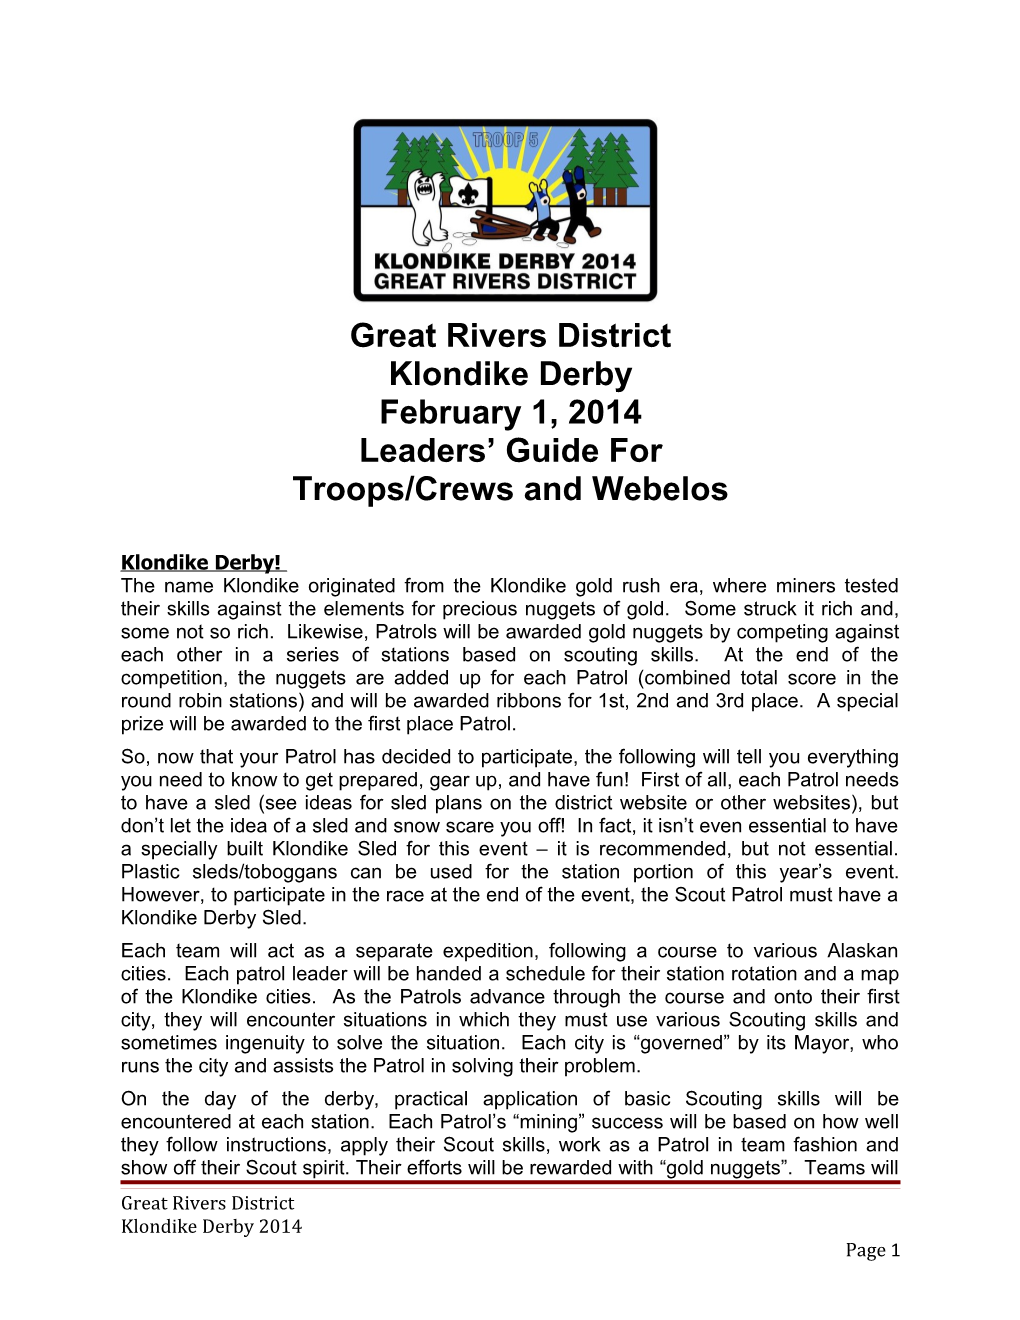 Great Rivers District s1